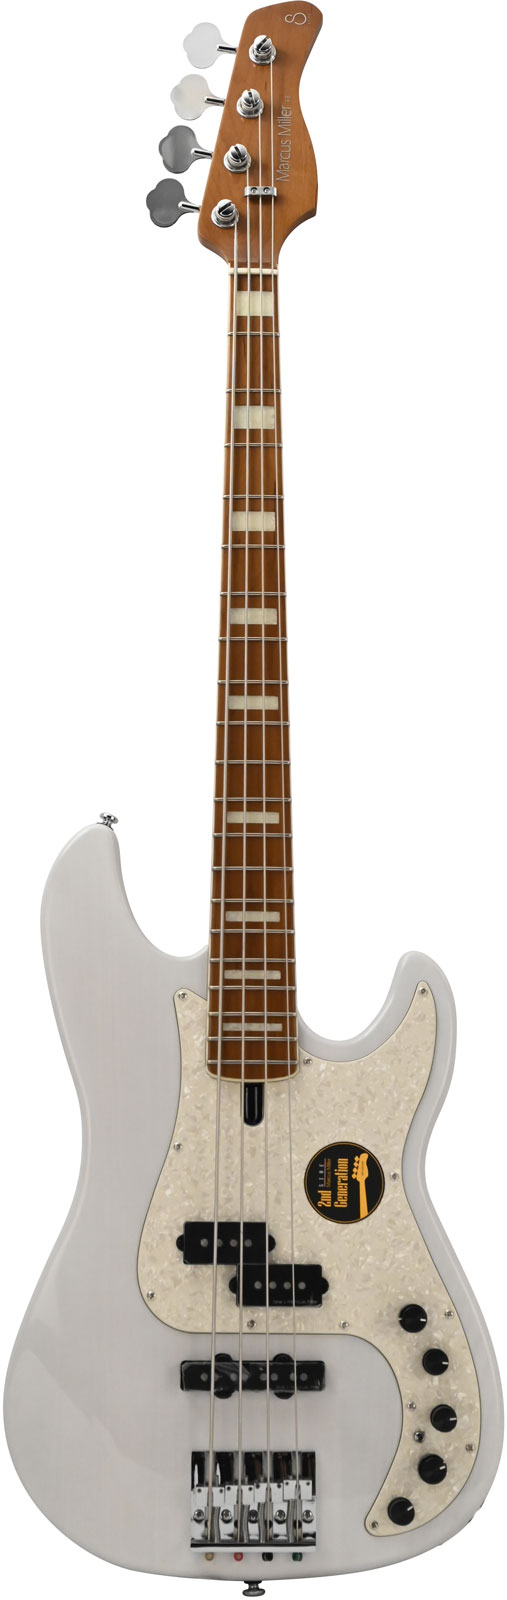 SIRE MARCUS MILLER P8 SWAMP ASH-4 WB MN + HOUSSE